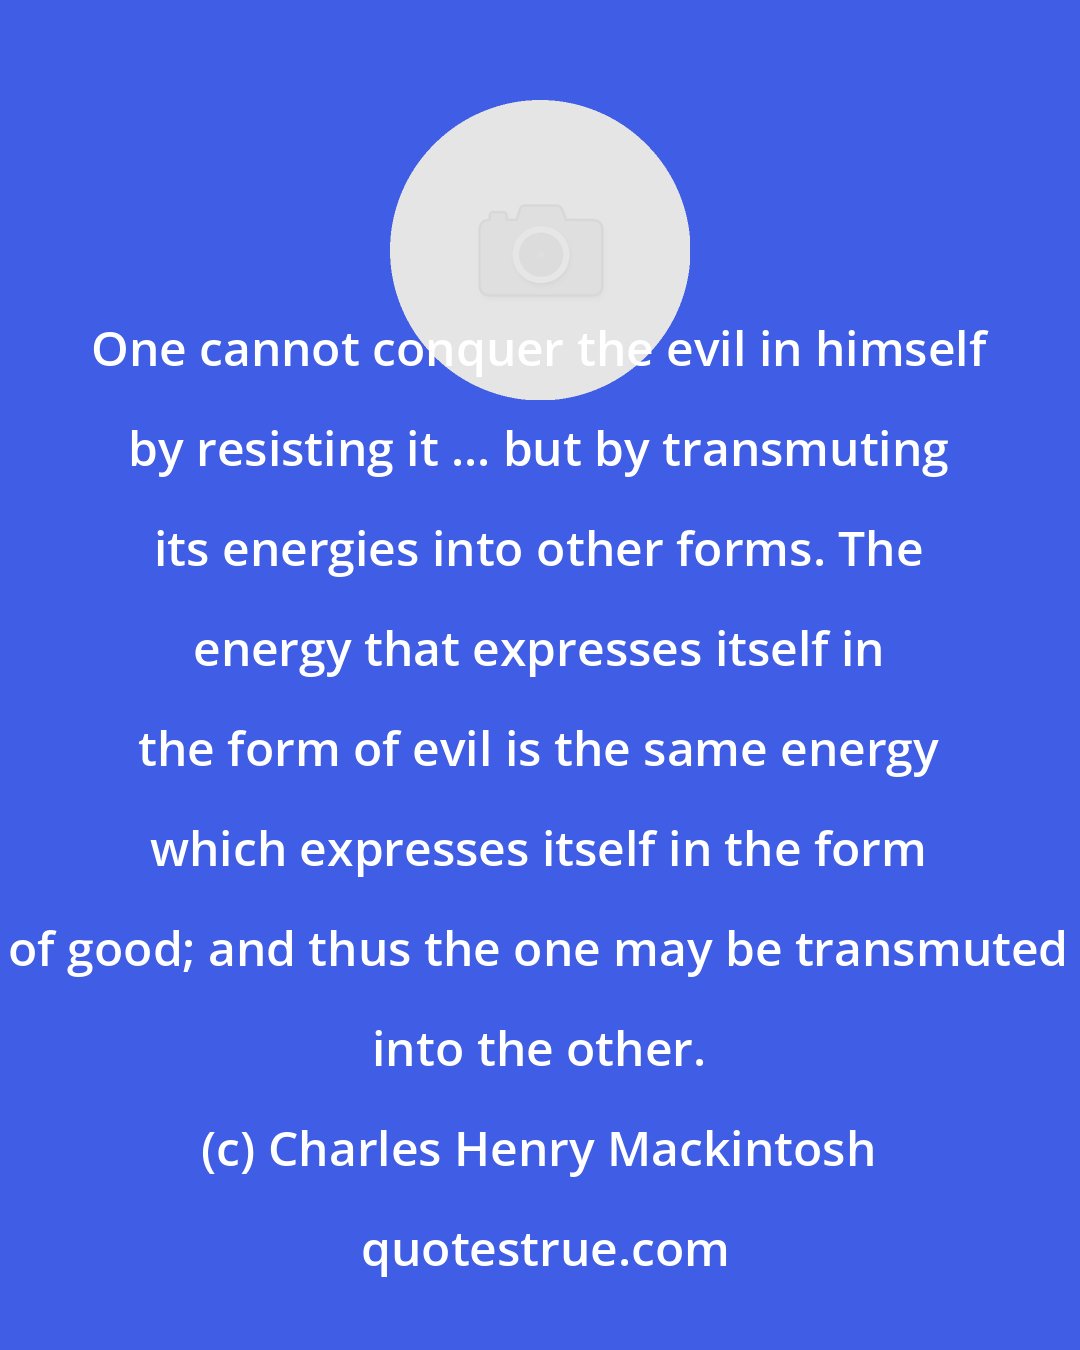 Charles Henry Mackintosh: One cannot conquer the evil in himself by resisting it ... but by transmuting its energies into other forms. The energy that expresses itself in the form of evil is the same energy which expresses itself in the form of good; and thus the one may be transmuted into the other.